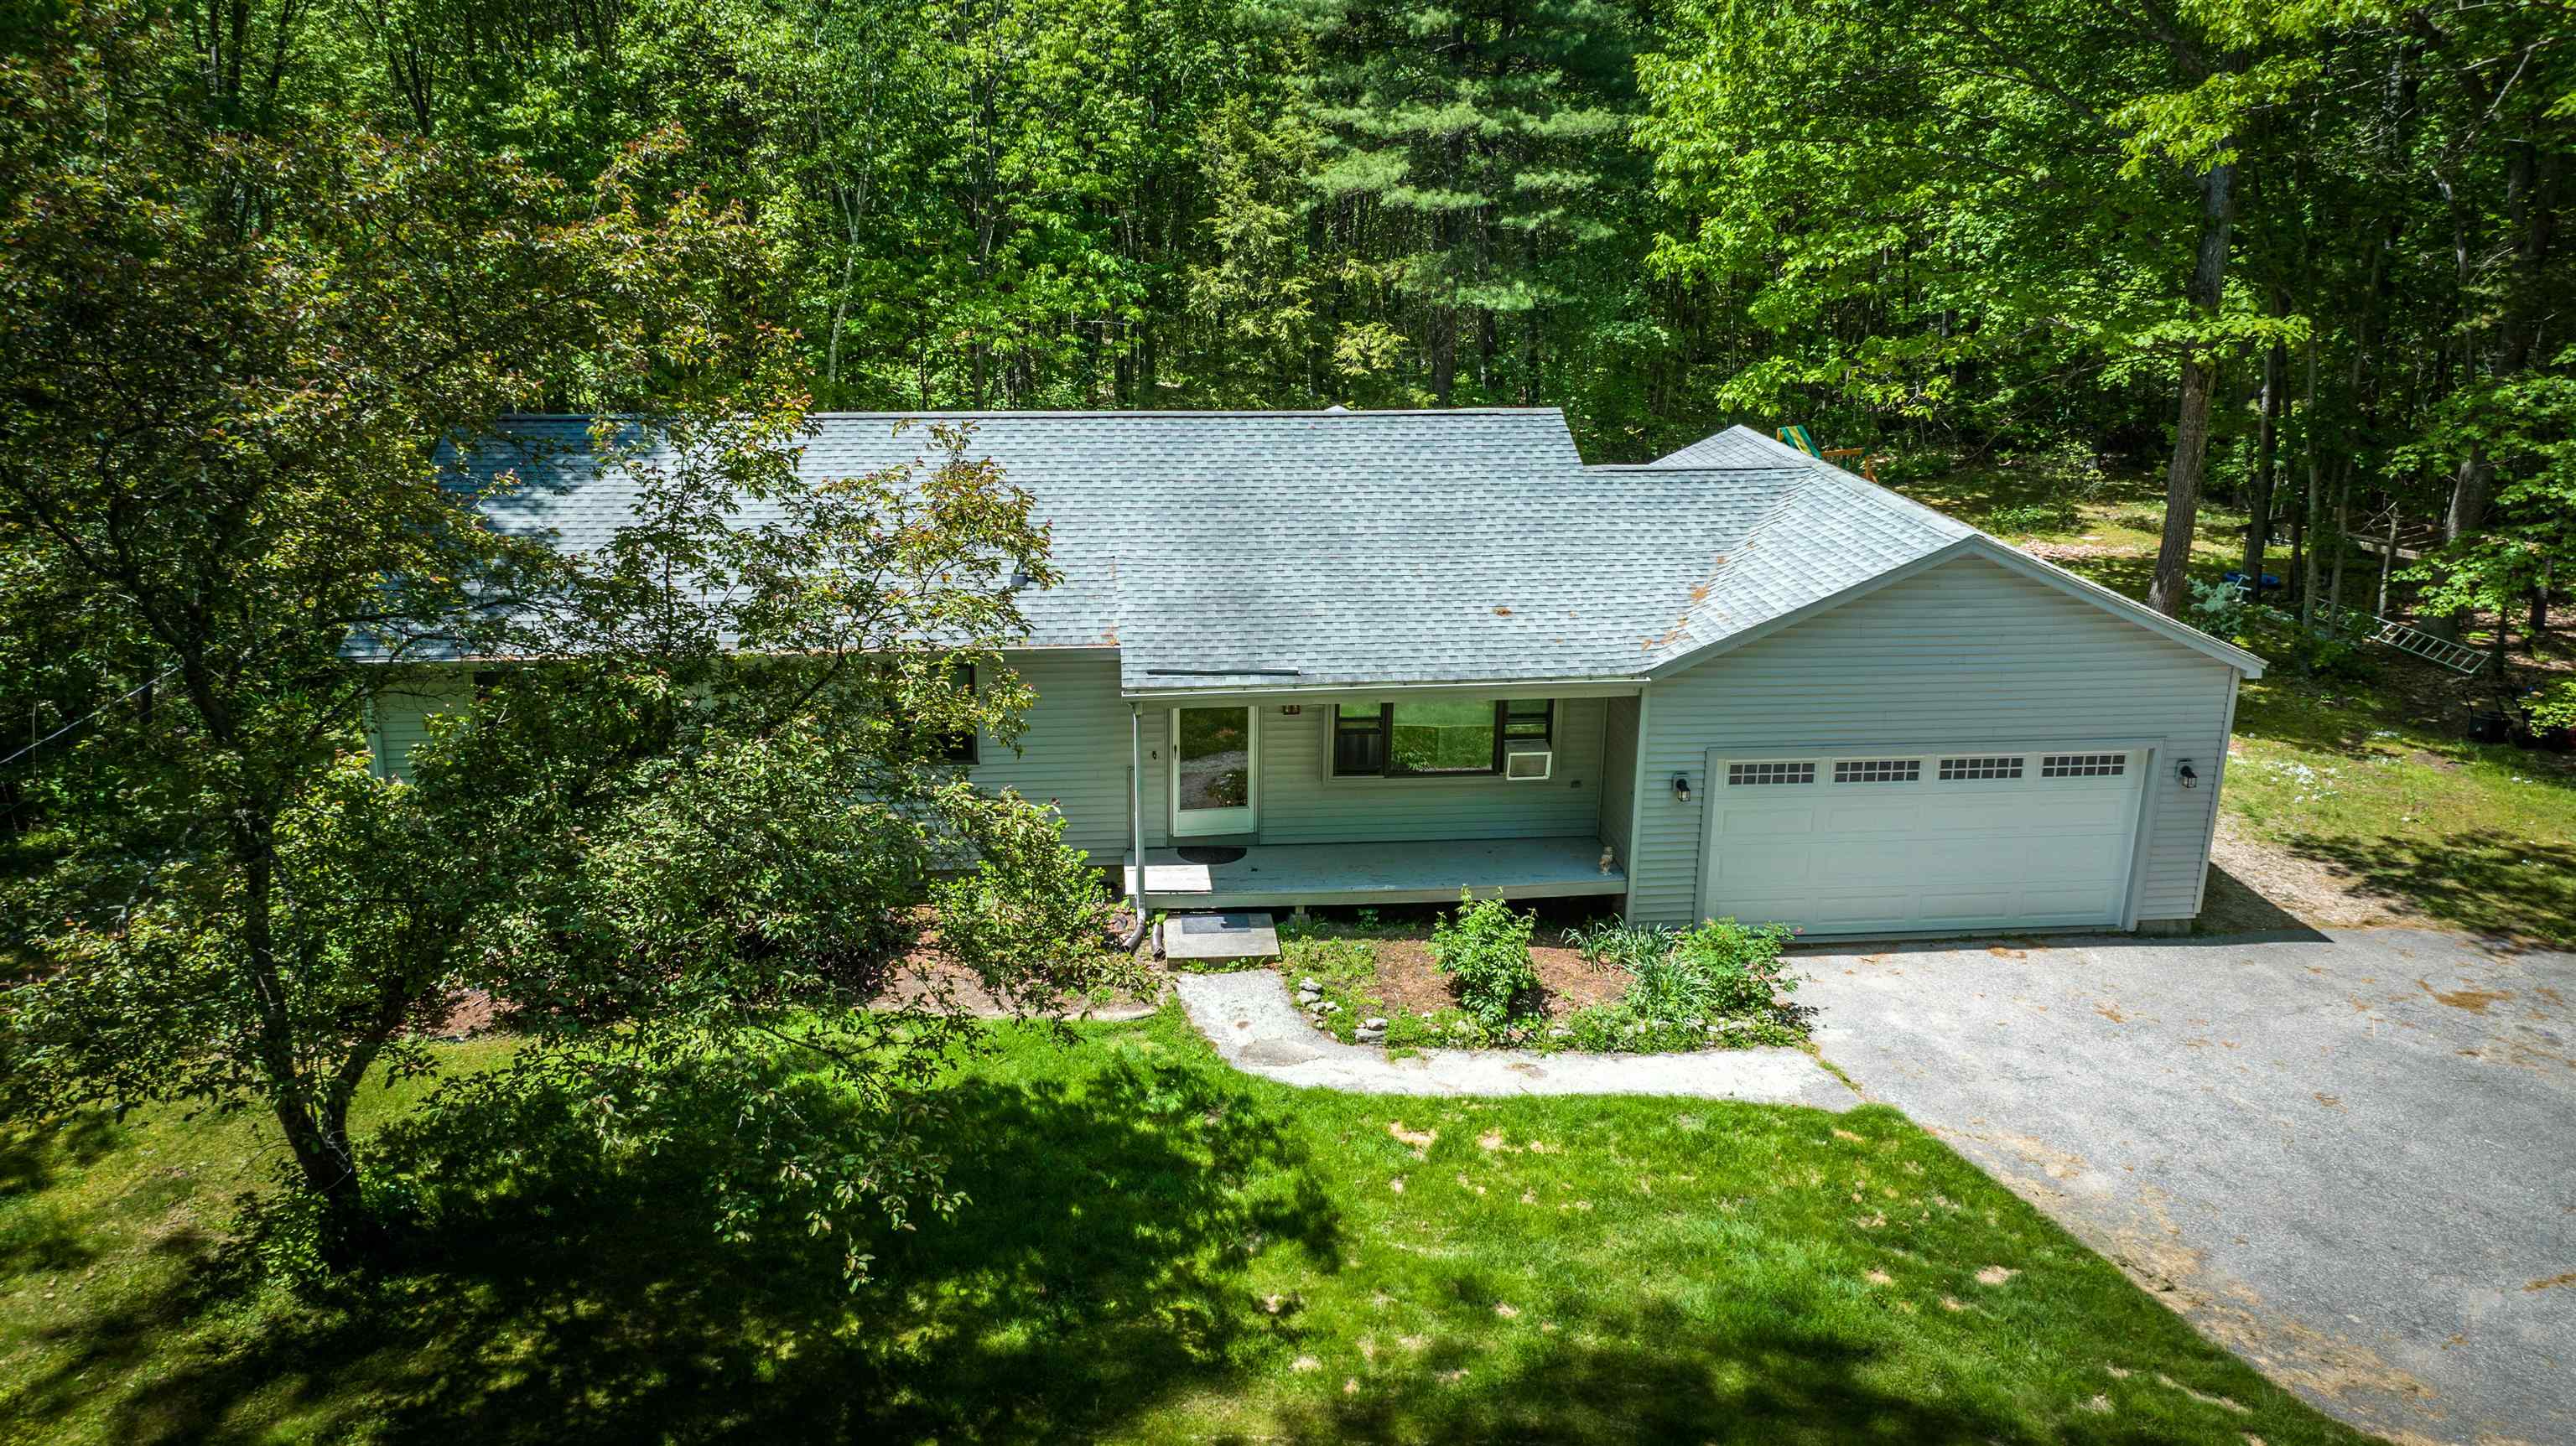 MLS 4930261: 46 Mill Road, Derry NH